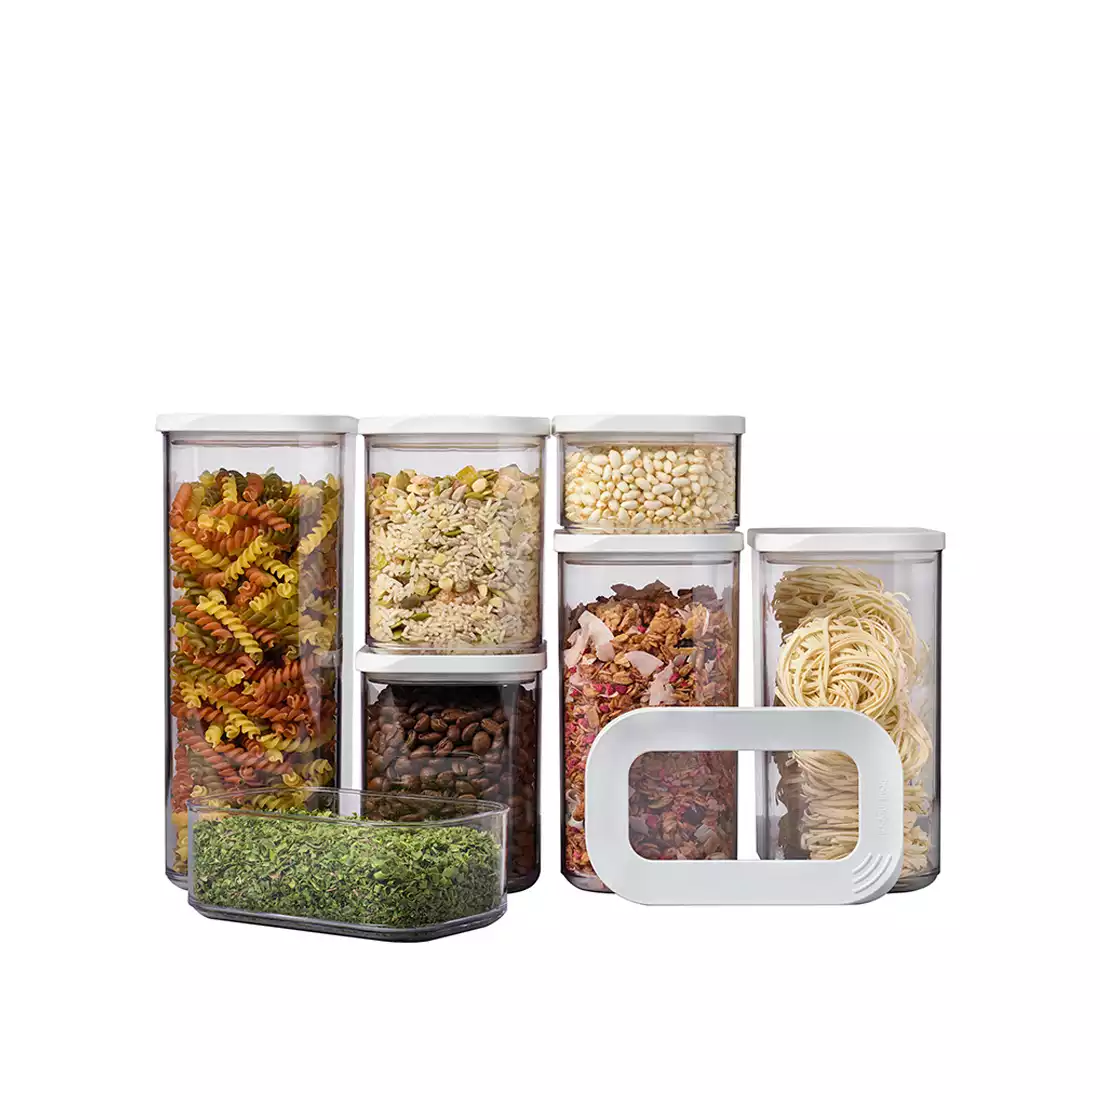 MEPAL MODULA set of 7 food containers, white